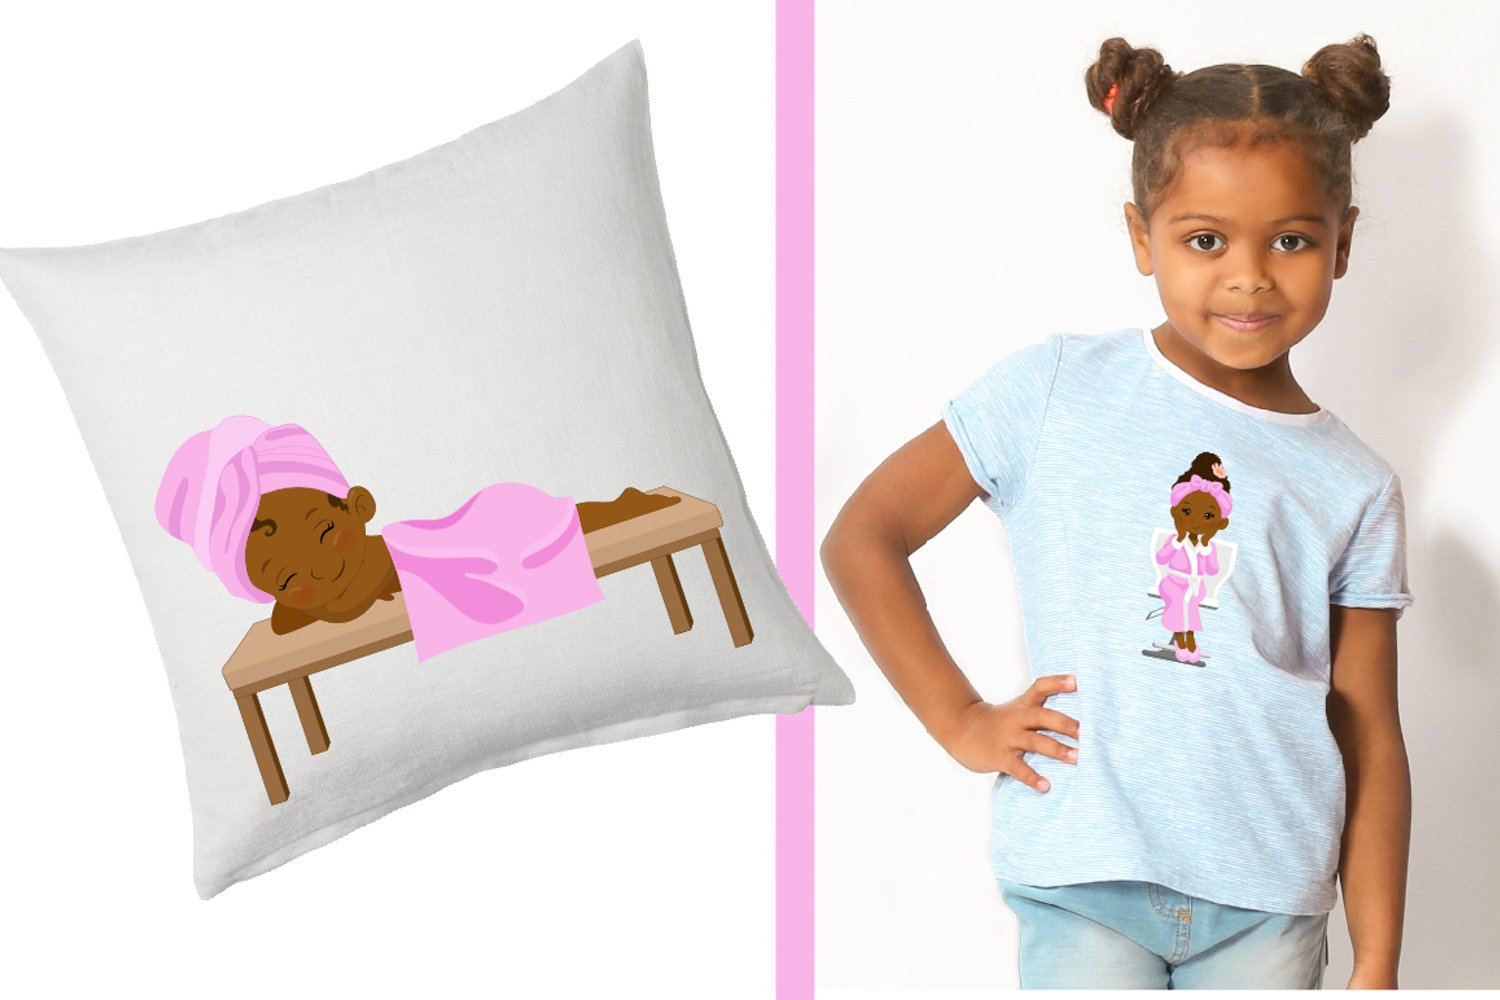 Baby girl design on the pillow and t-shirt.